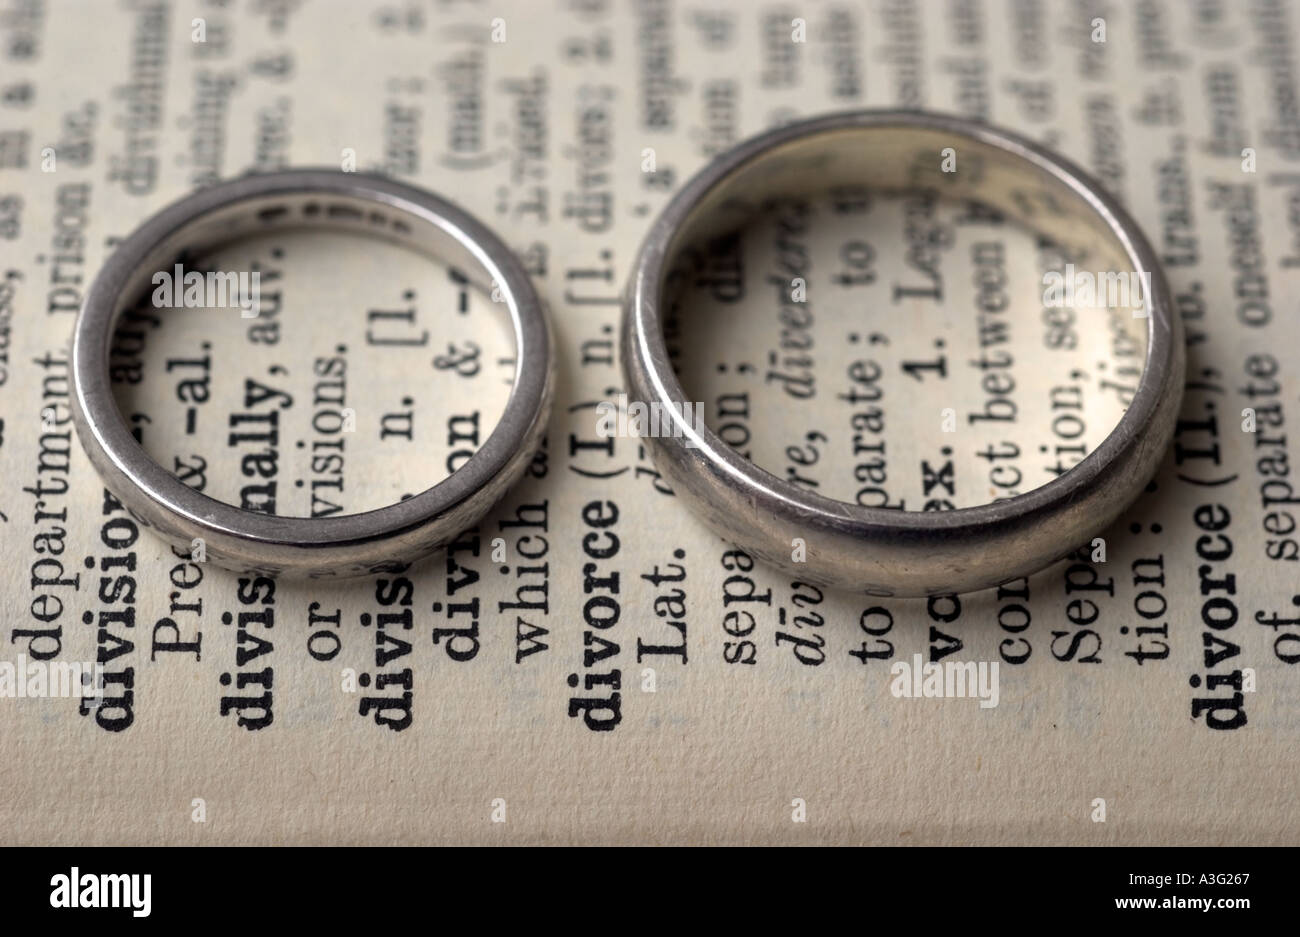 Wedding rings on a dictionary showing the word divorce Stock Photo